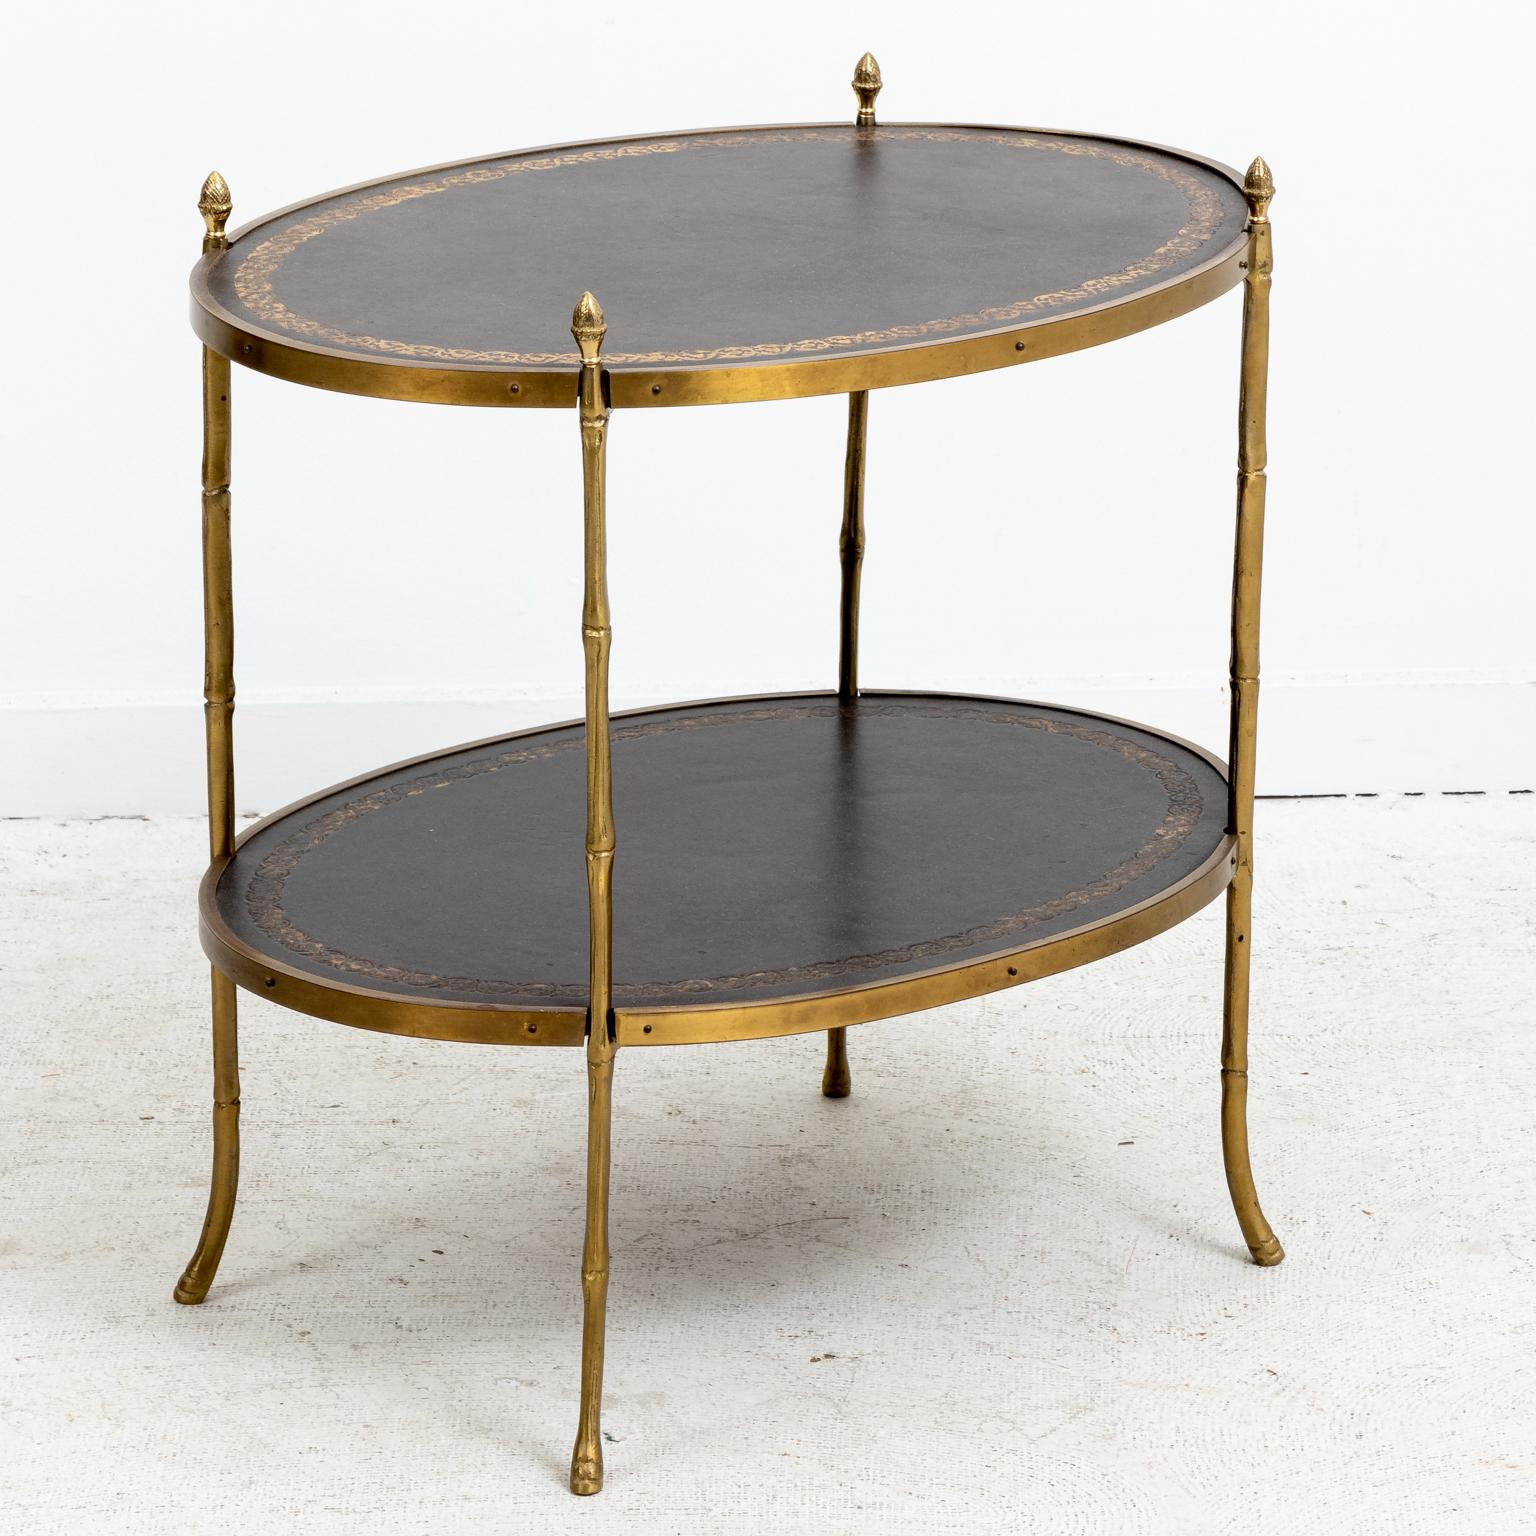 Late 20th Century English Regency Style Cocktail Table